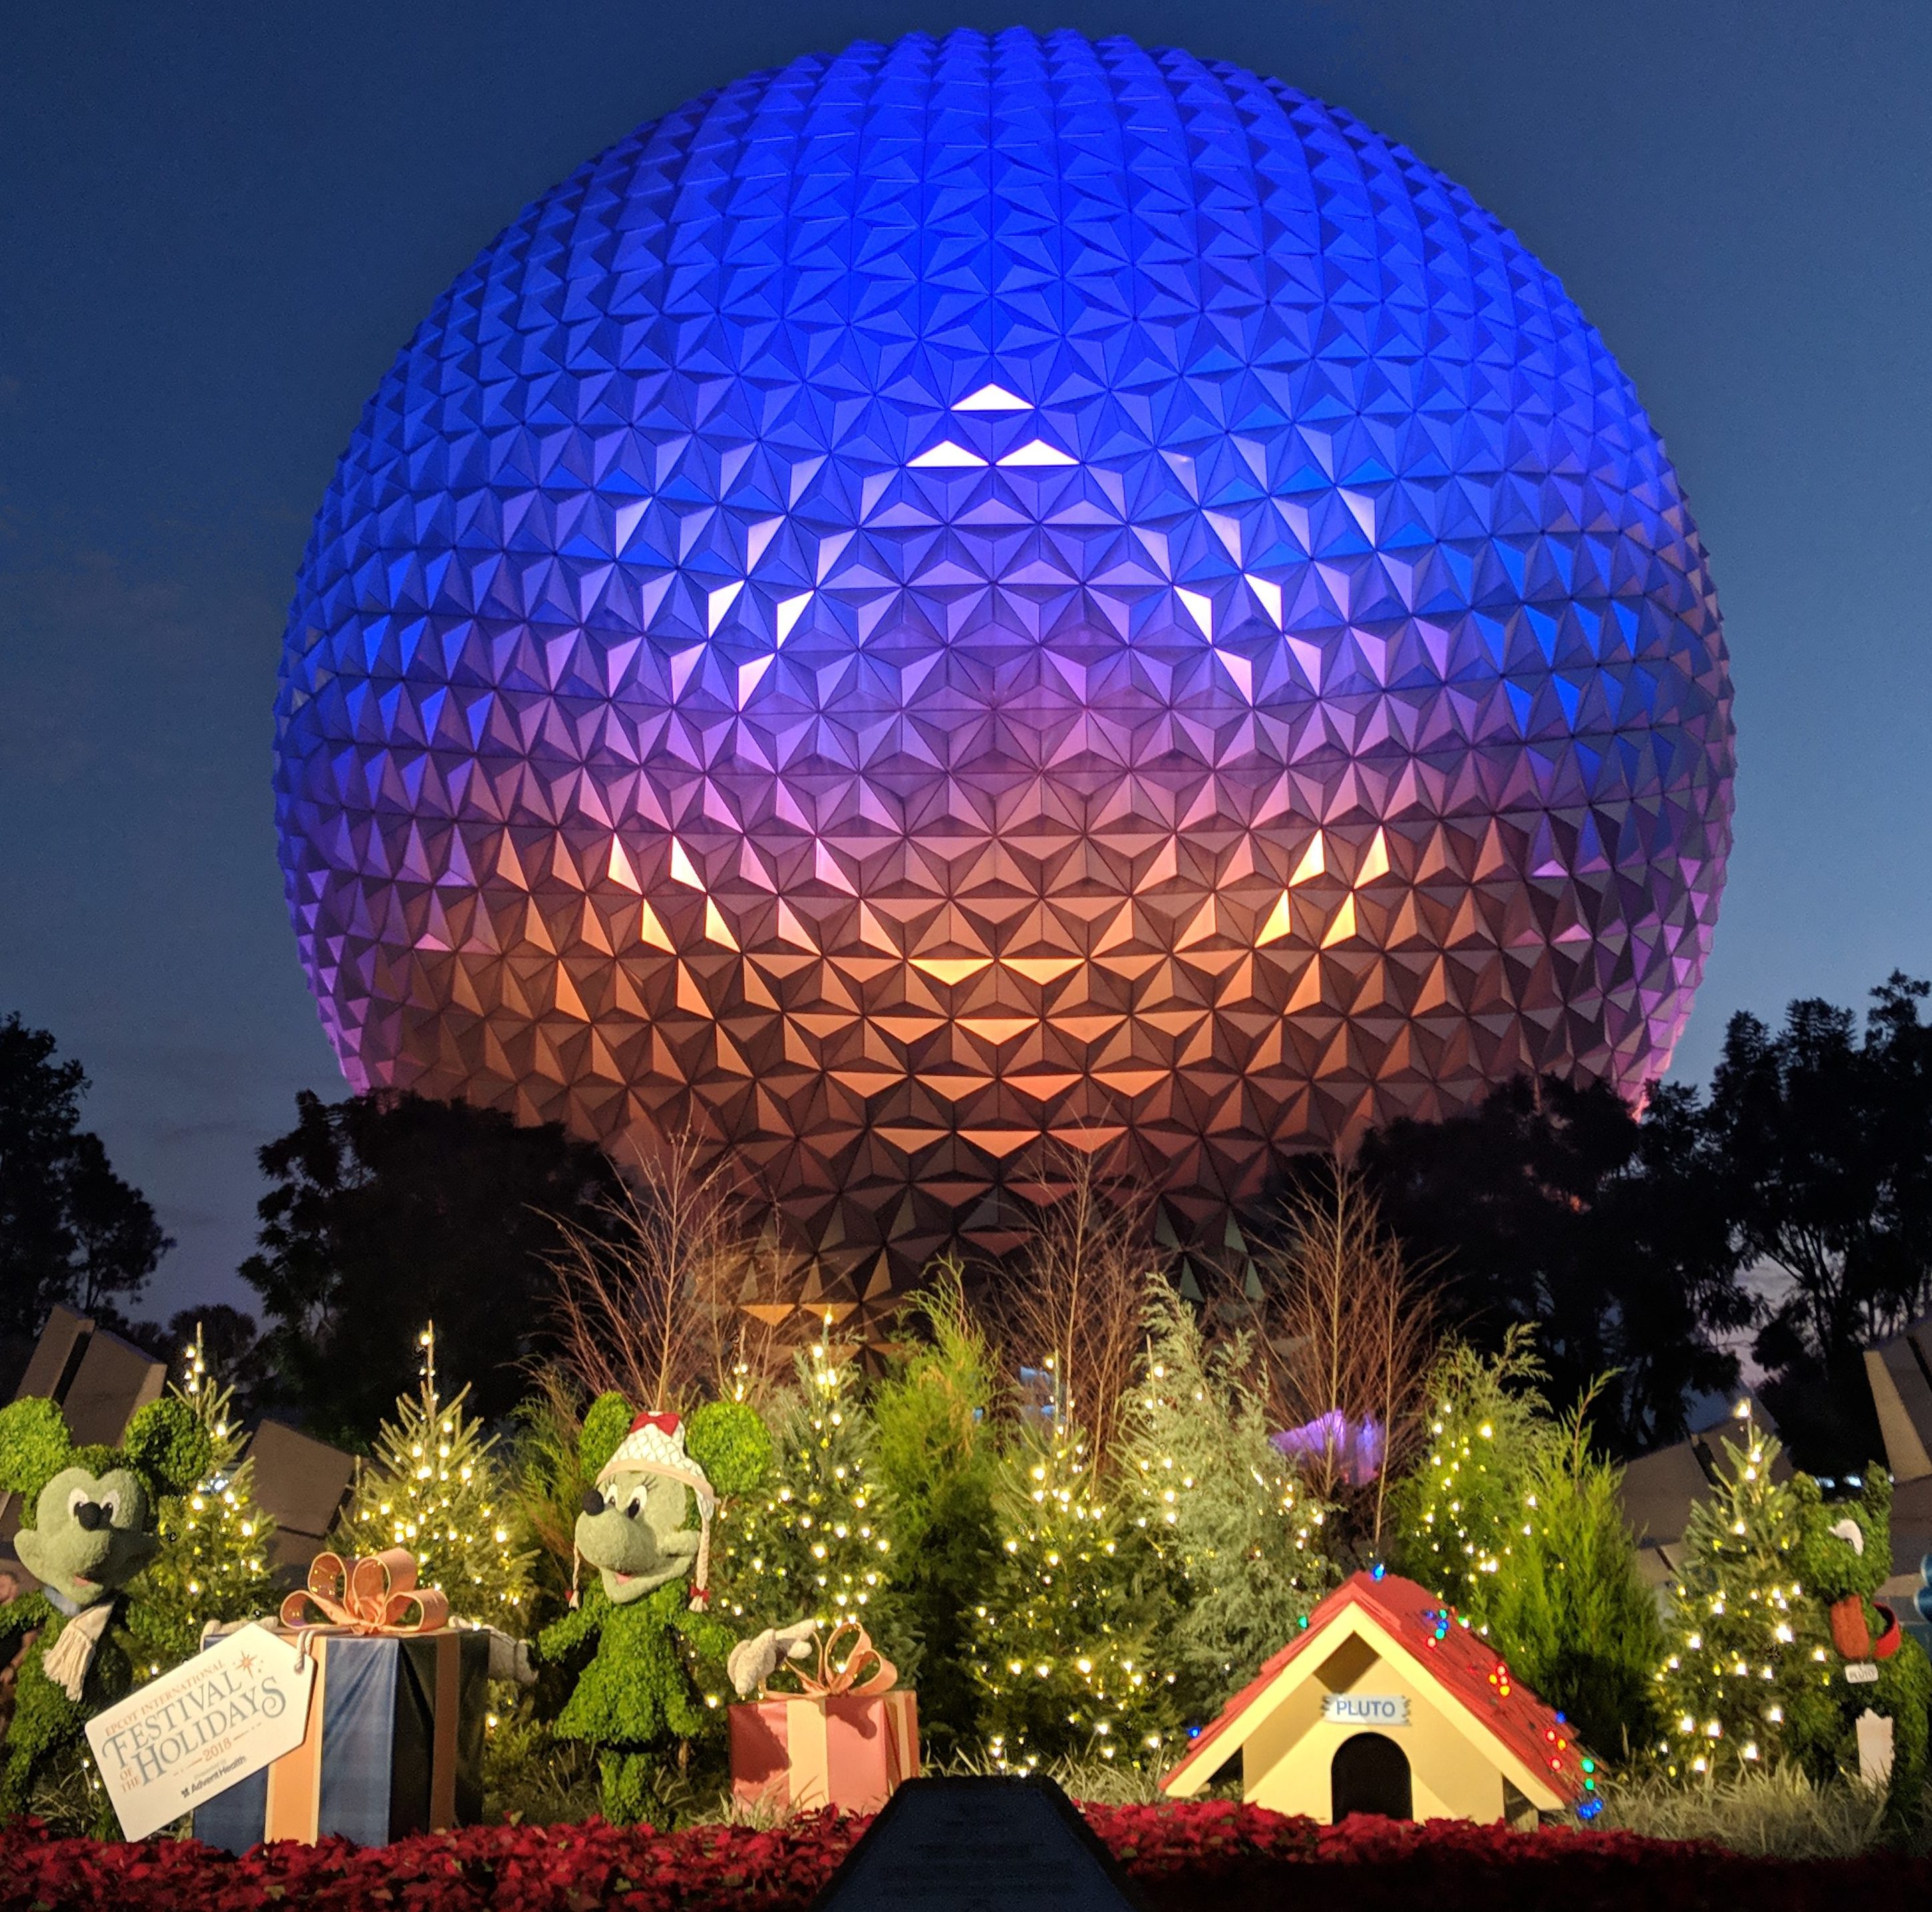 Top 105+ Images what time does the epcot ball light up Full HD, 2k, 4k